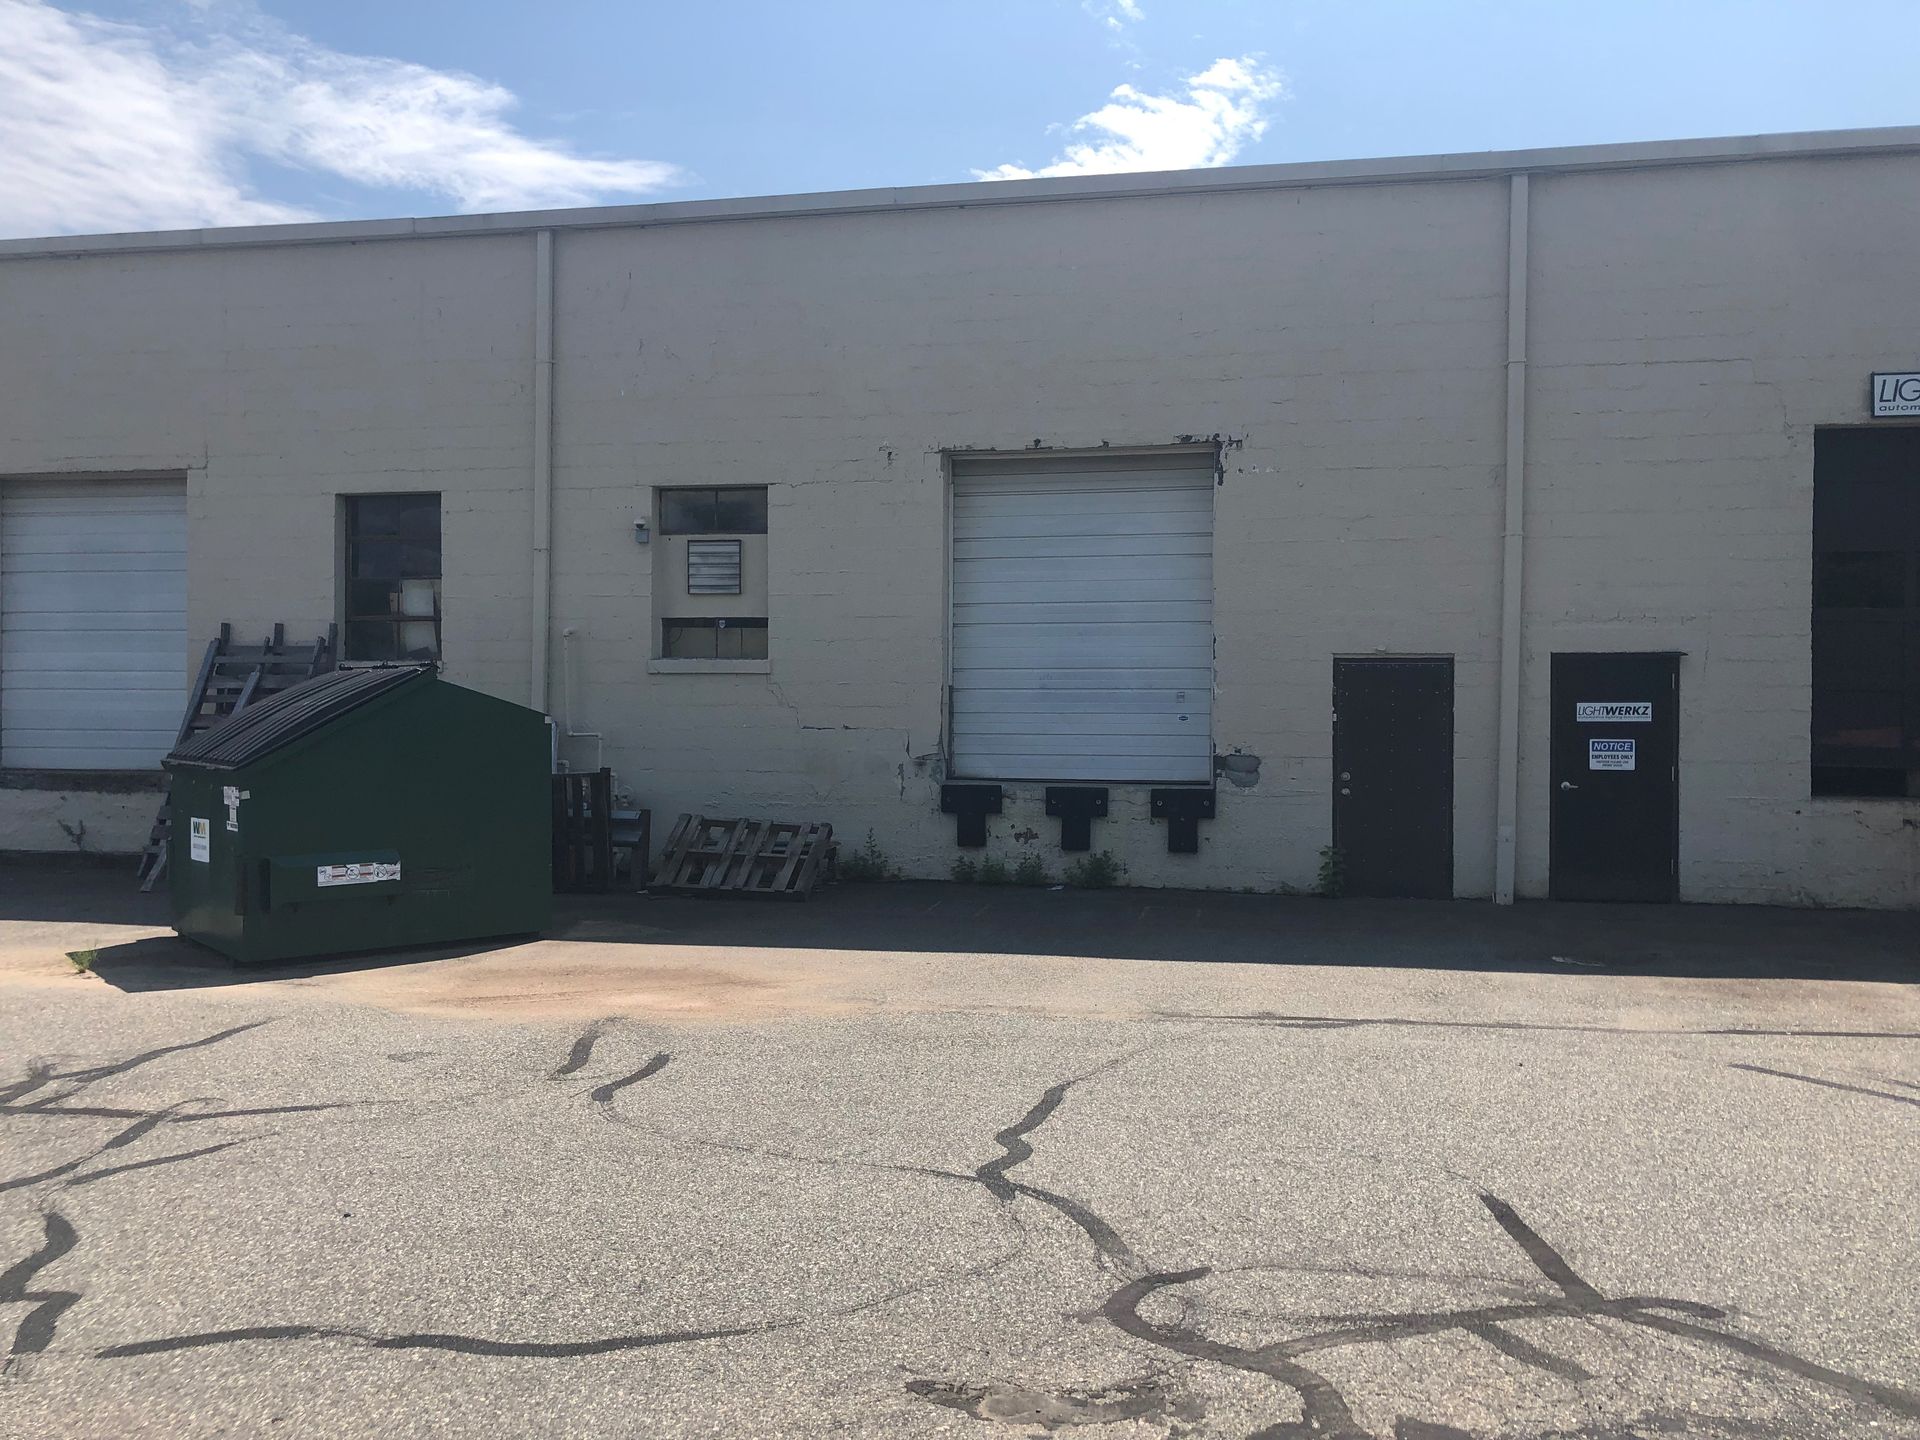 Light Industrial Zone — Clifton, NJ — Evergreen Commercial Real Estate Brokers Inc